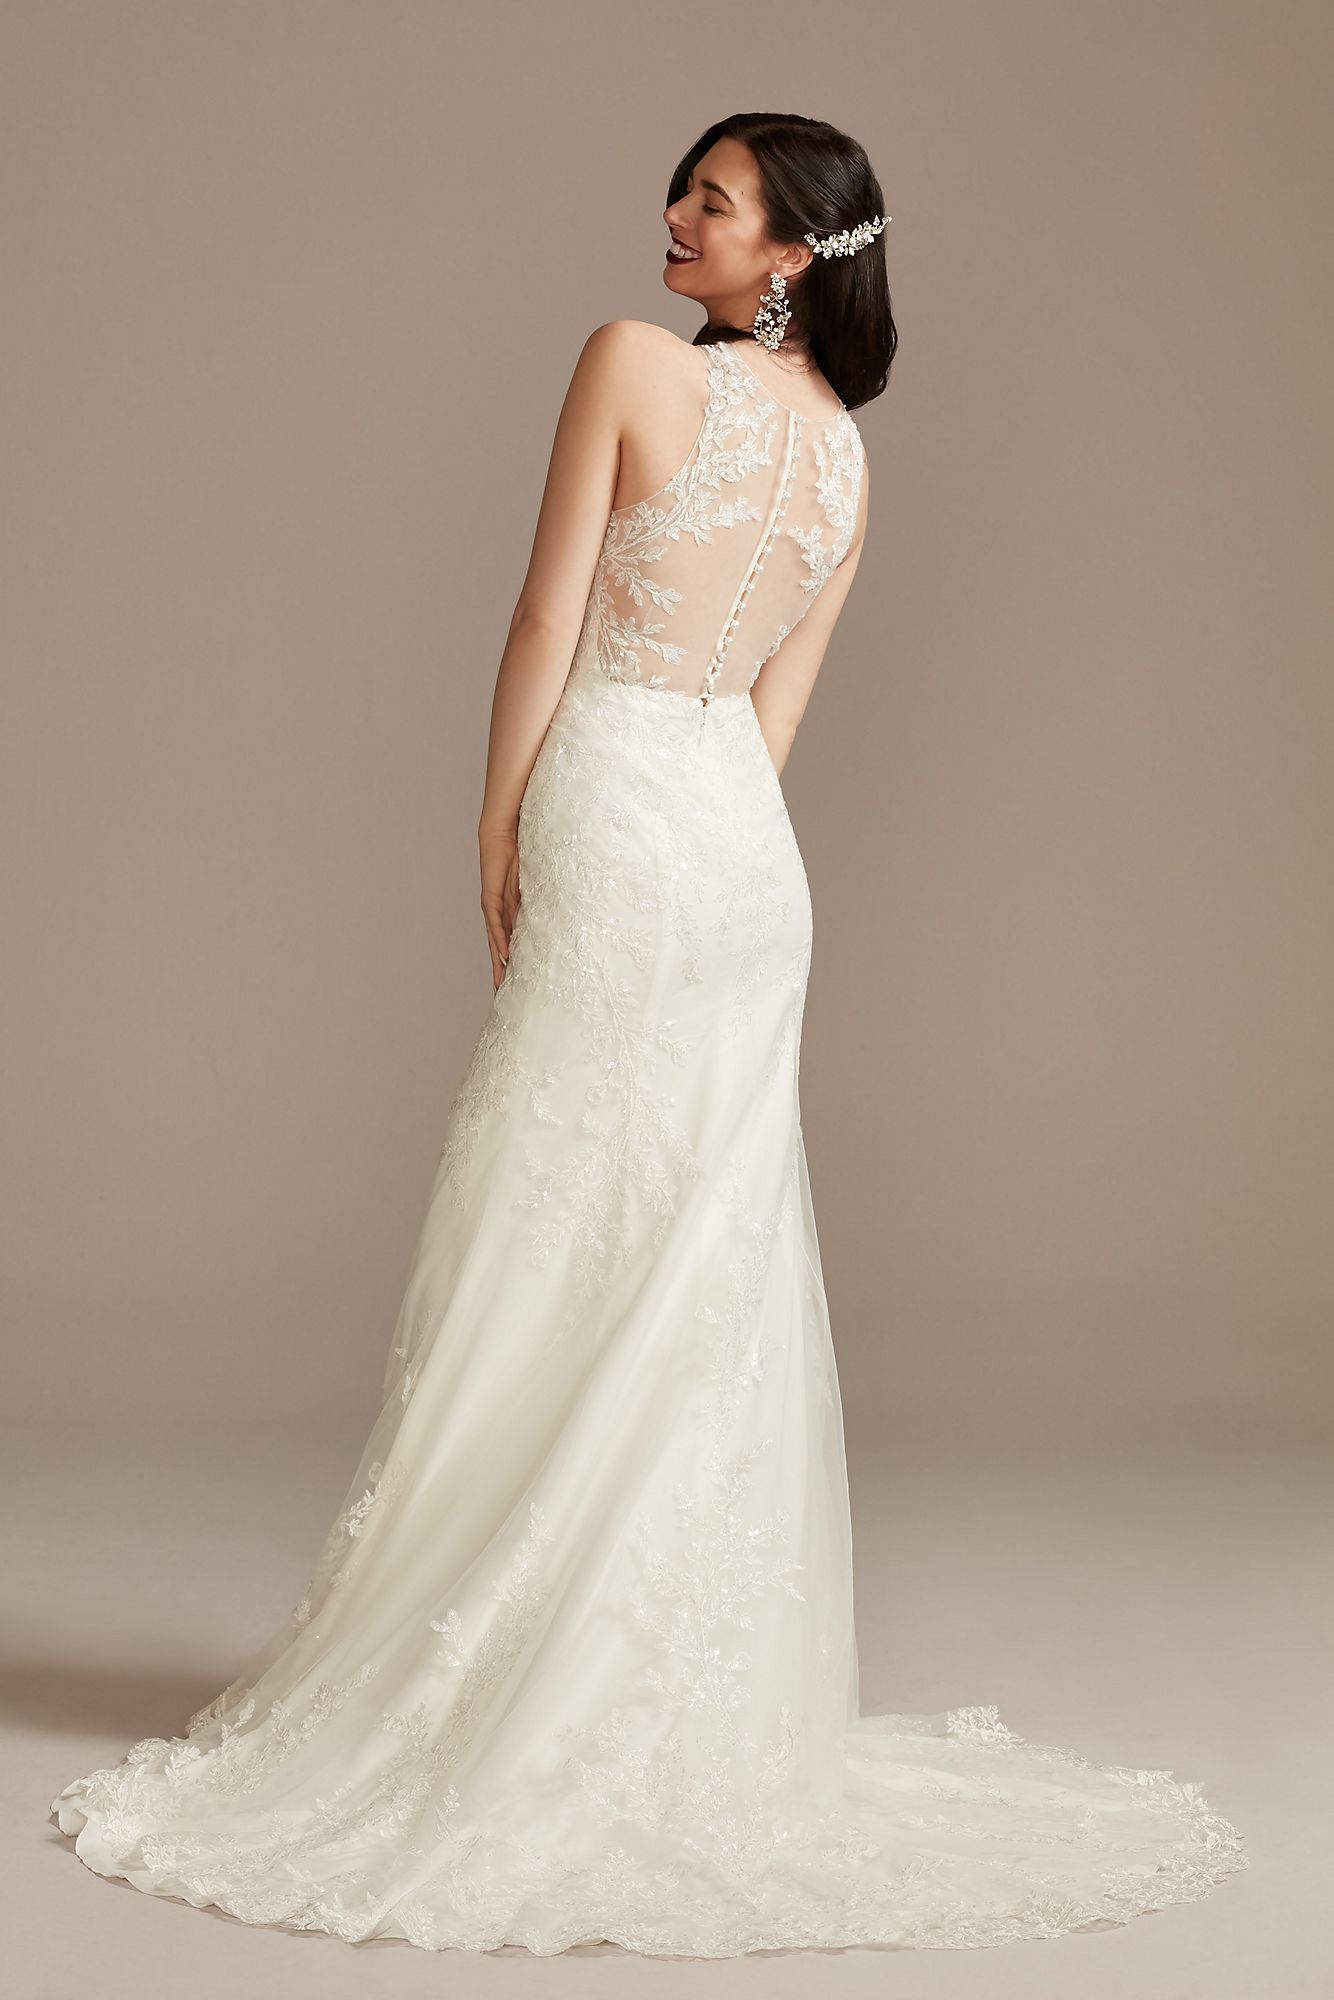 Buttoned Illusion Back Wedding Dress with Applique Oleg Cassini CWG909